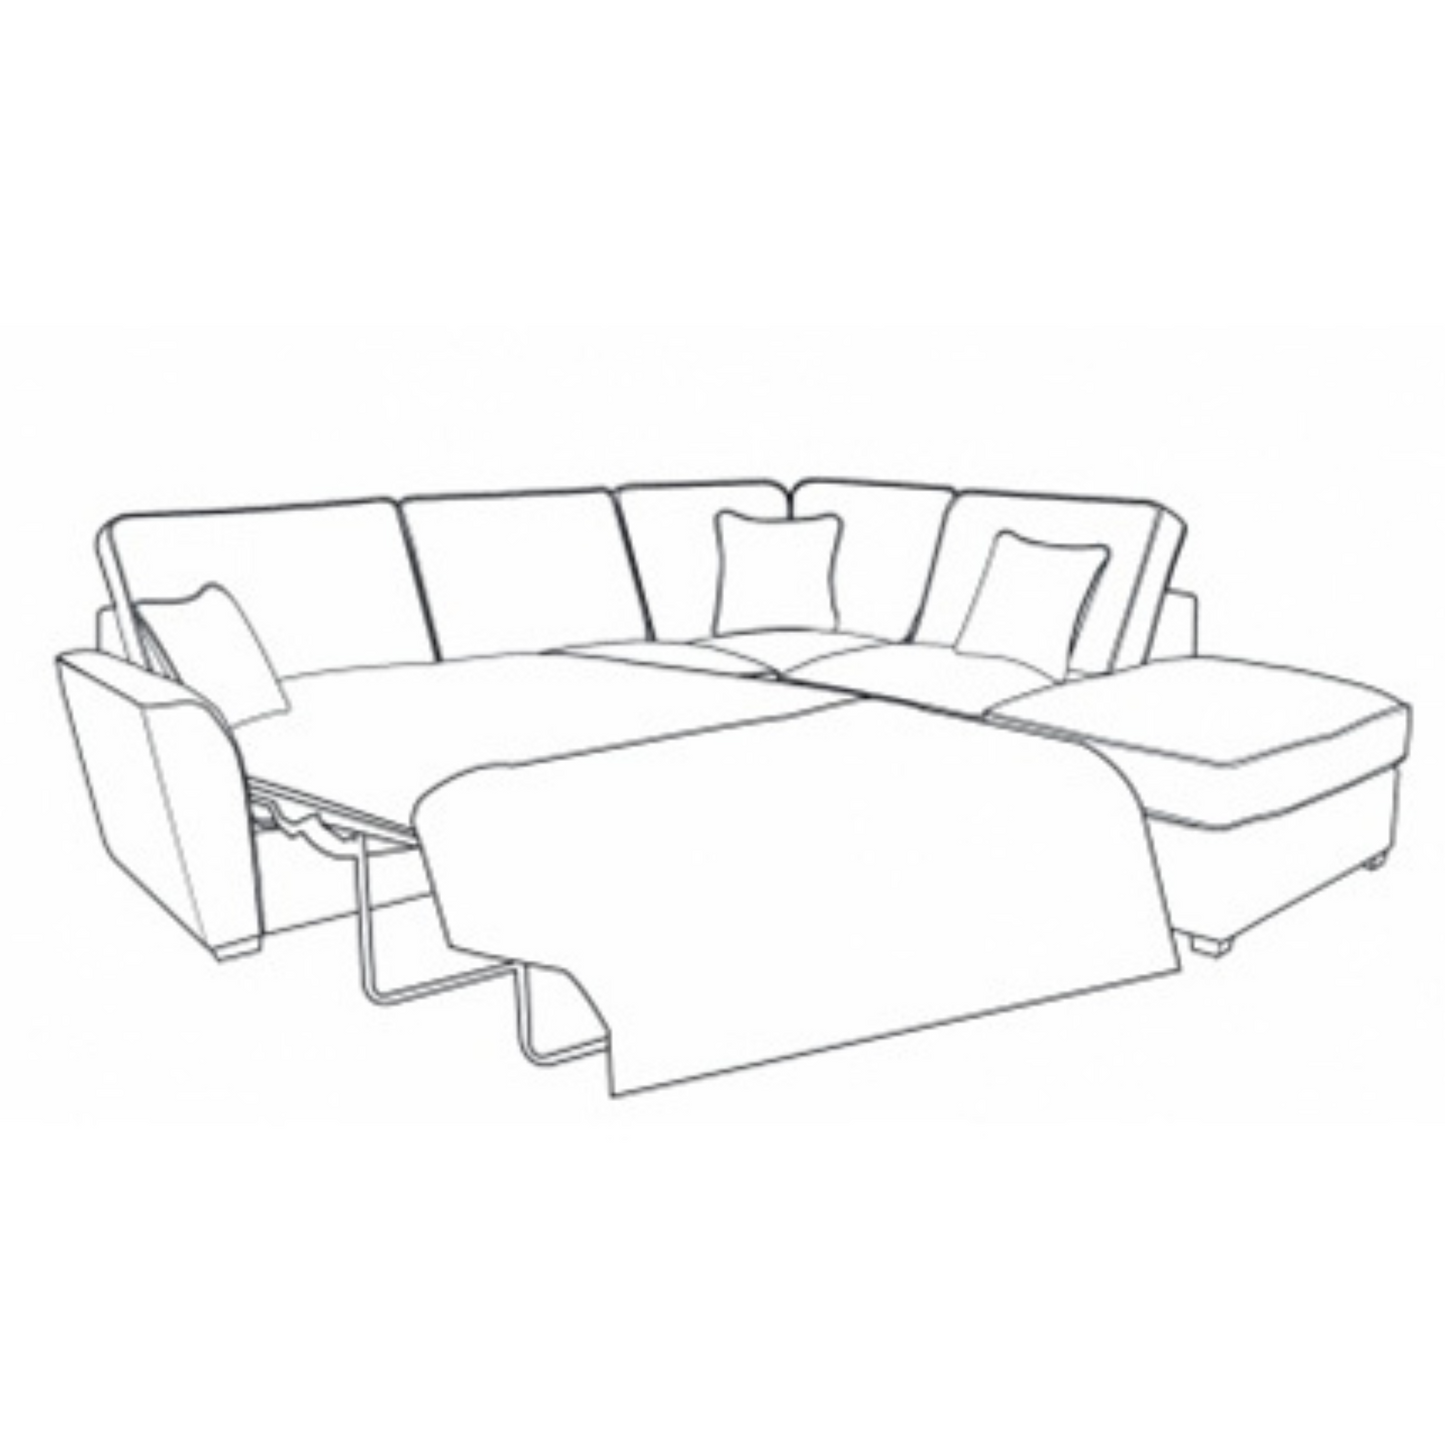 Fantasia 4 Seater Corner Sofa Bed with Footstool